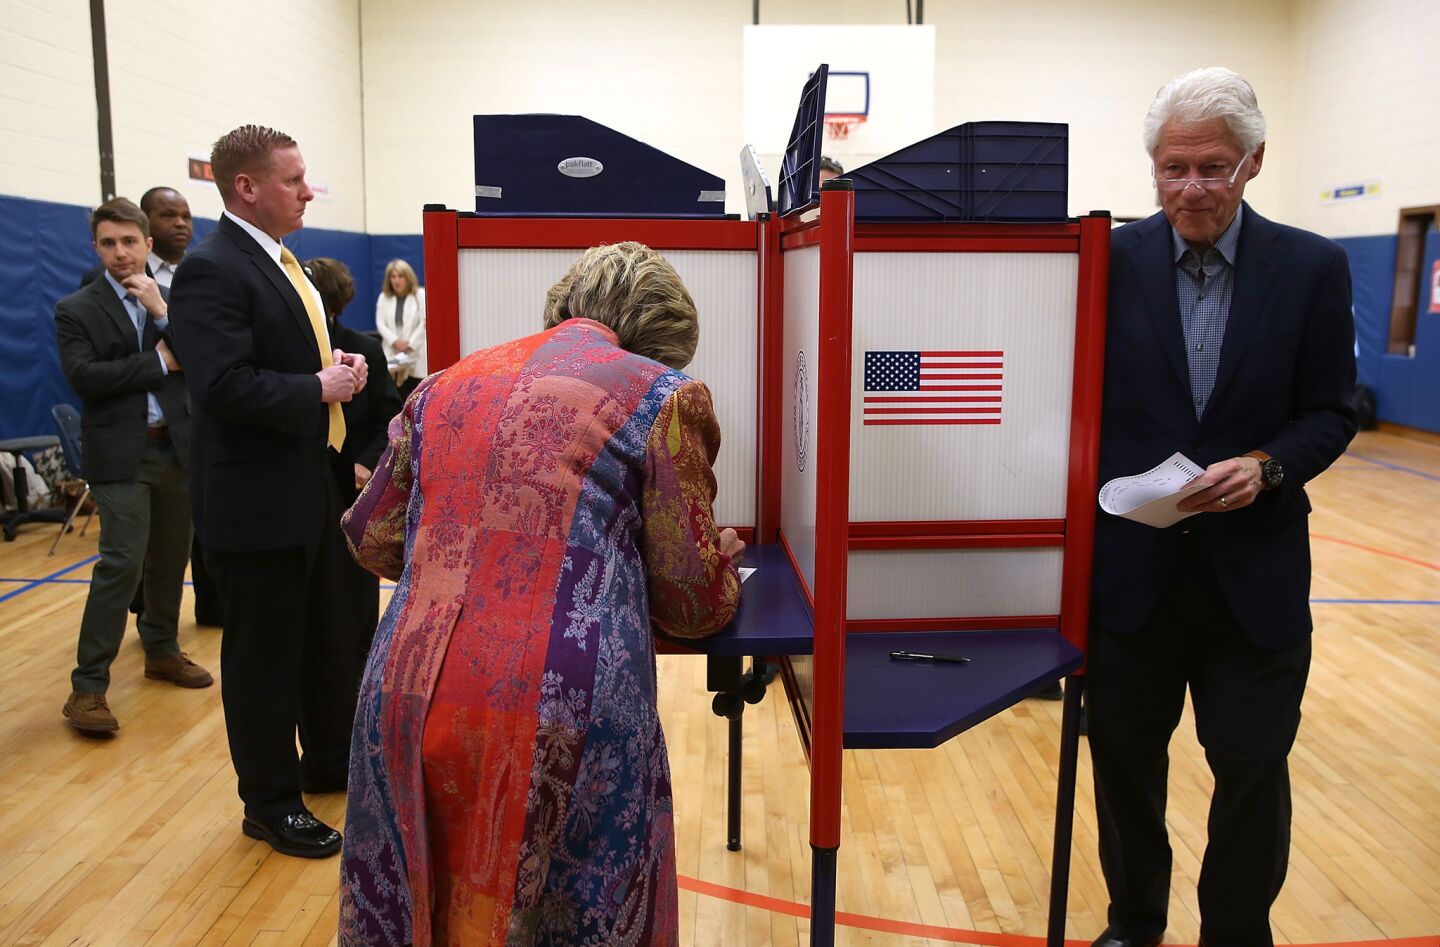 Hillary Clinton and her husband, former President Clinton, vote in Chappaqua, N.Y.